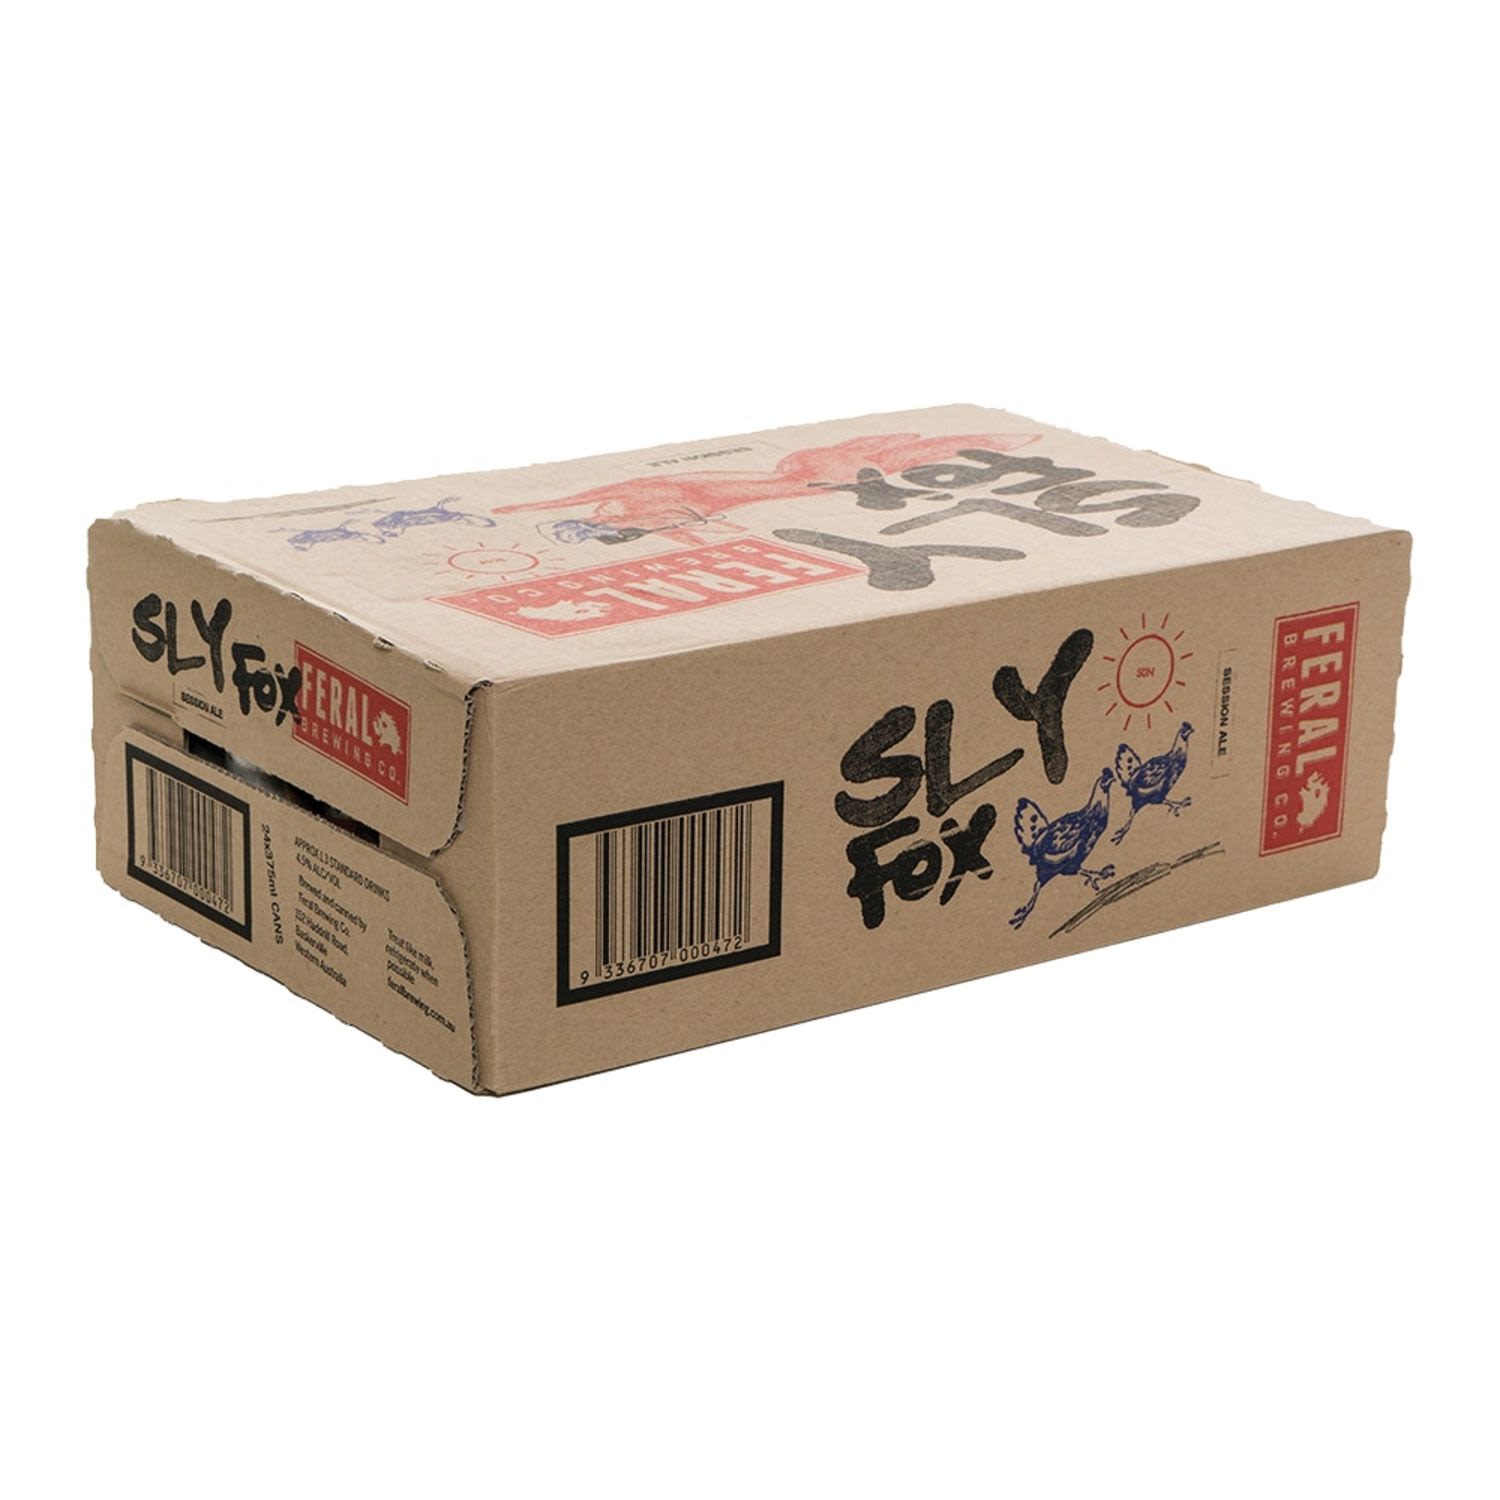 Feral Sly Fox Session Ale Can 375mL 24 Pack